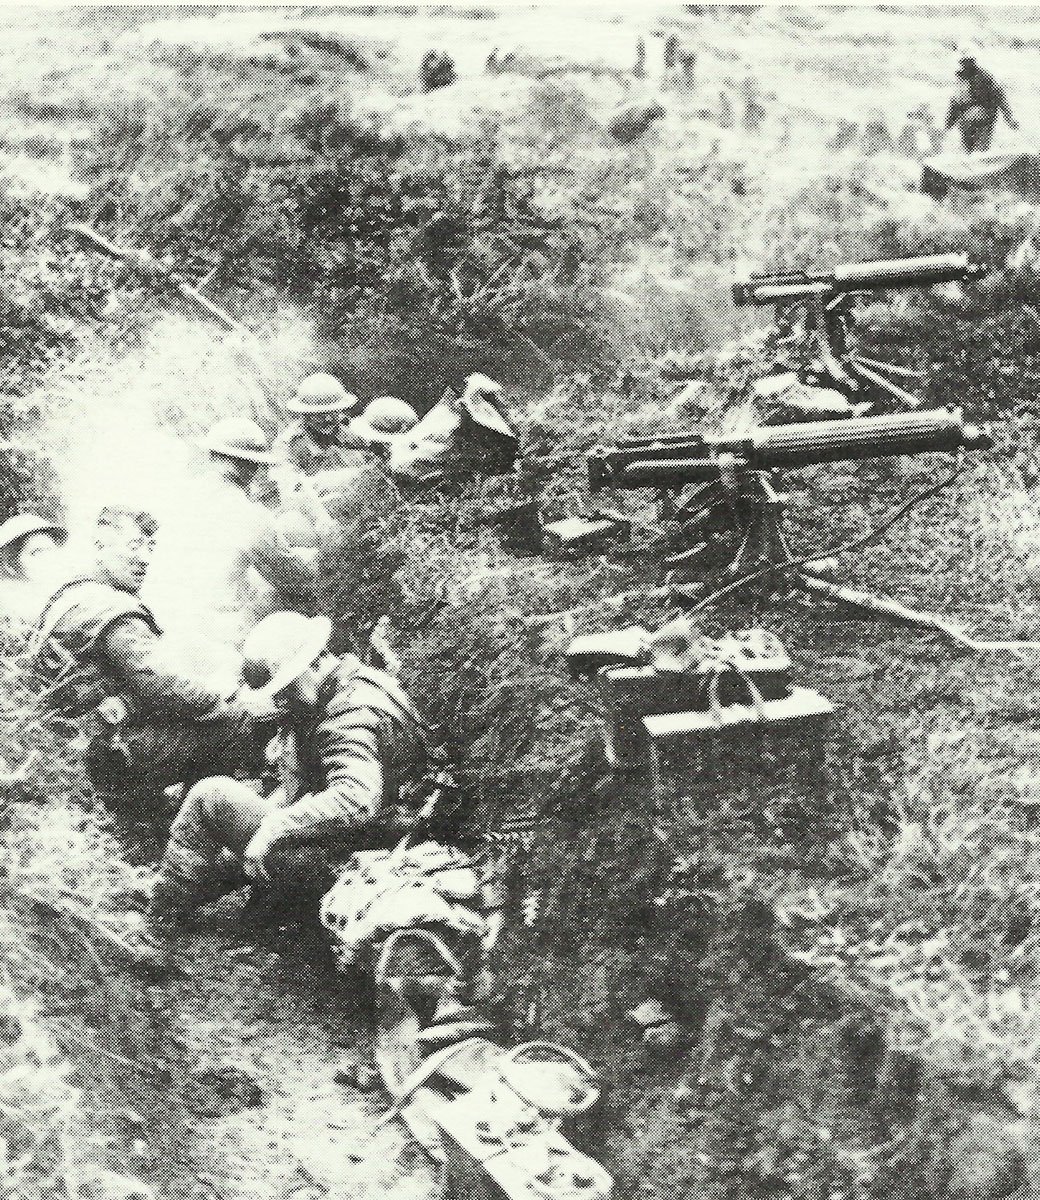 Vickers MG gunners have settled in a discontinued position